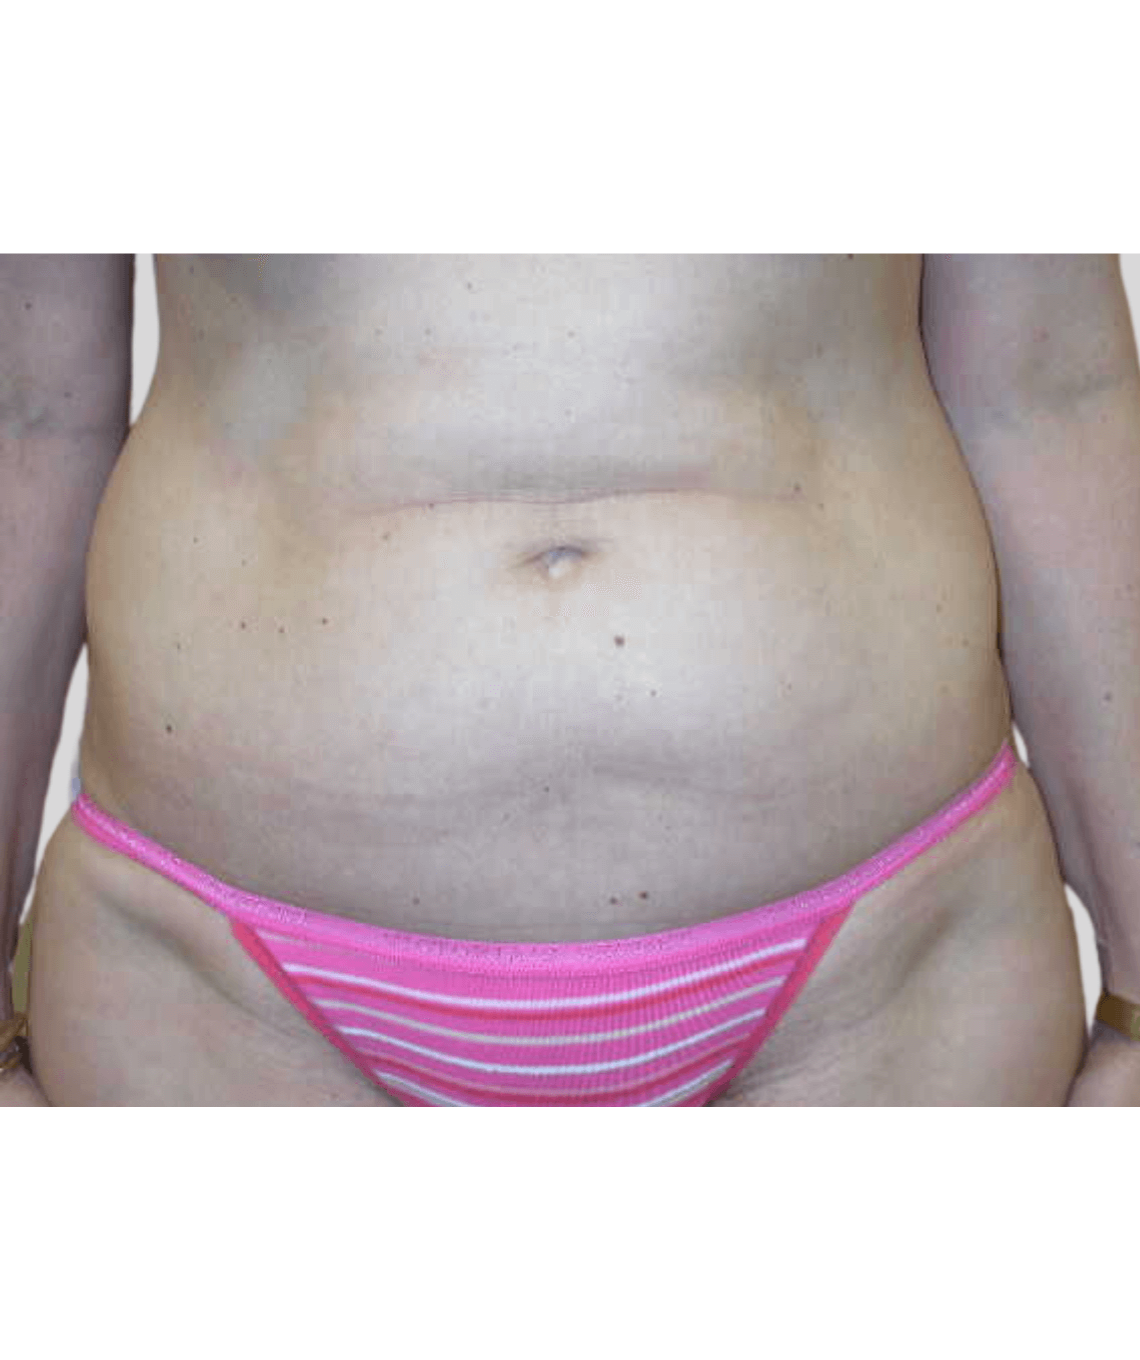 liposuction - before and after photos - prma plastic surgery - case 42